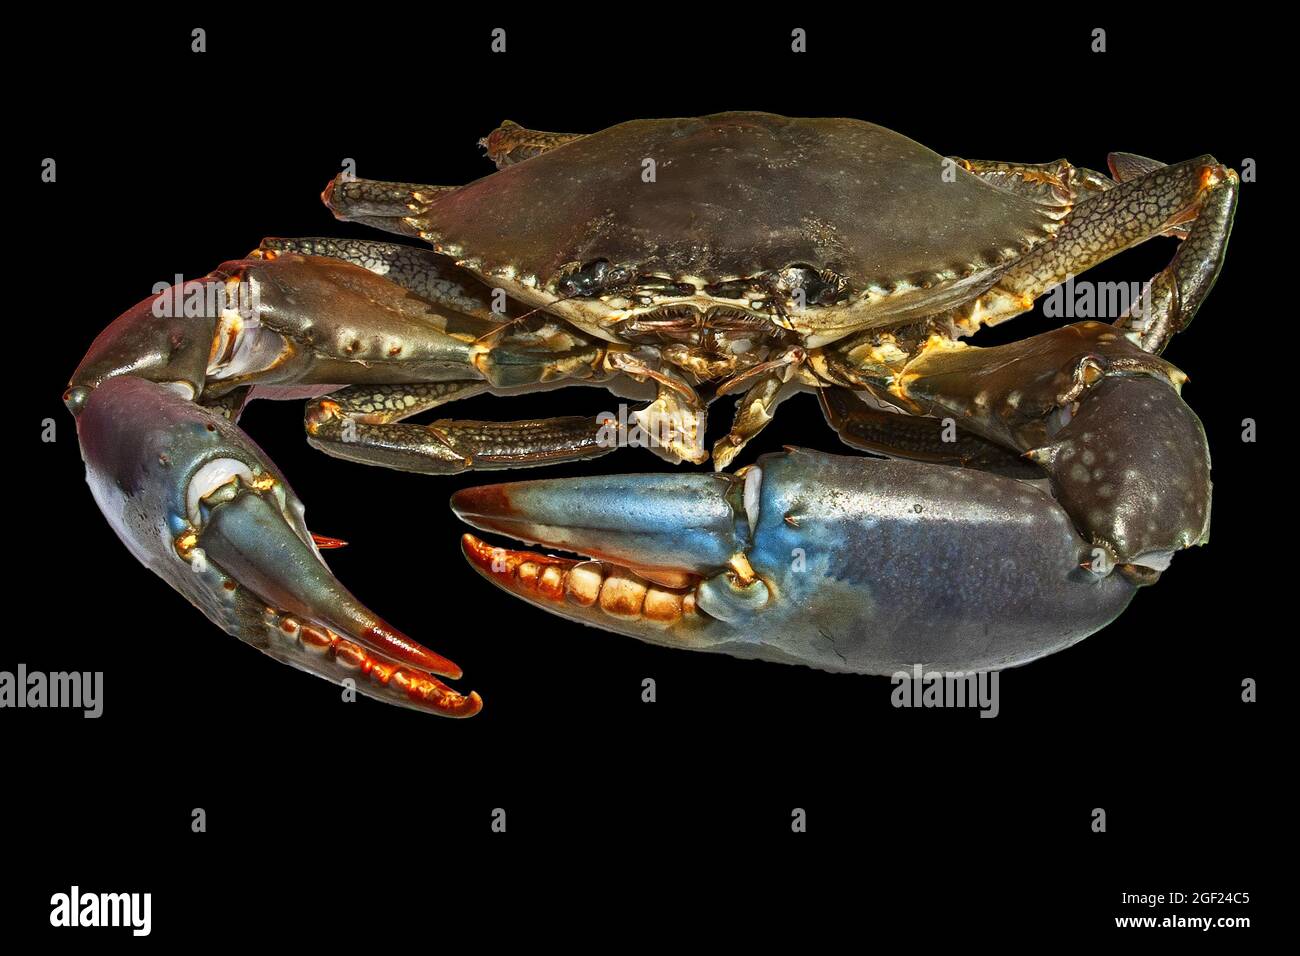 Live Australian Giant Mud Crab (Scylla serrata). Isolated on black background. Also known as Mangrove and Serrated Crab. Queensland, Australia. Stock Photo